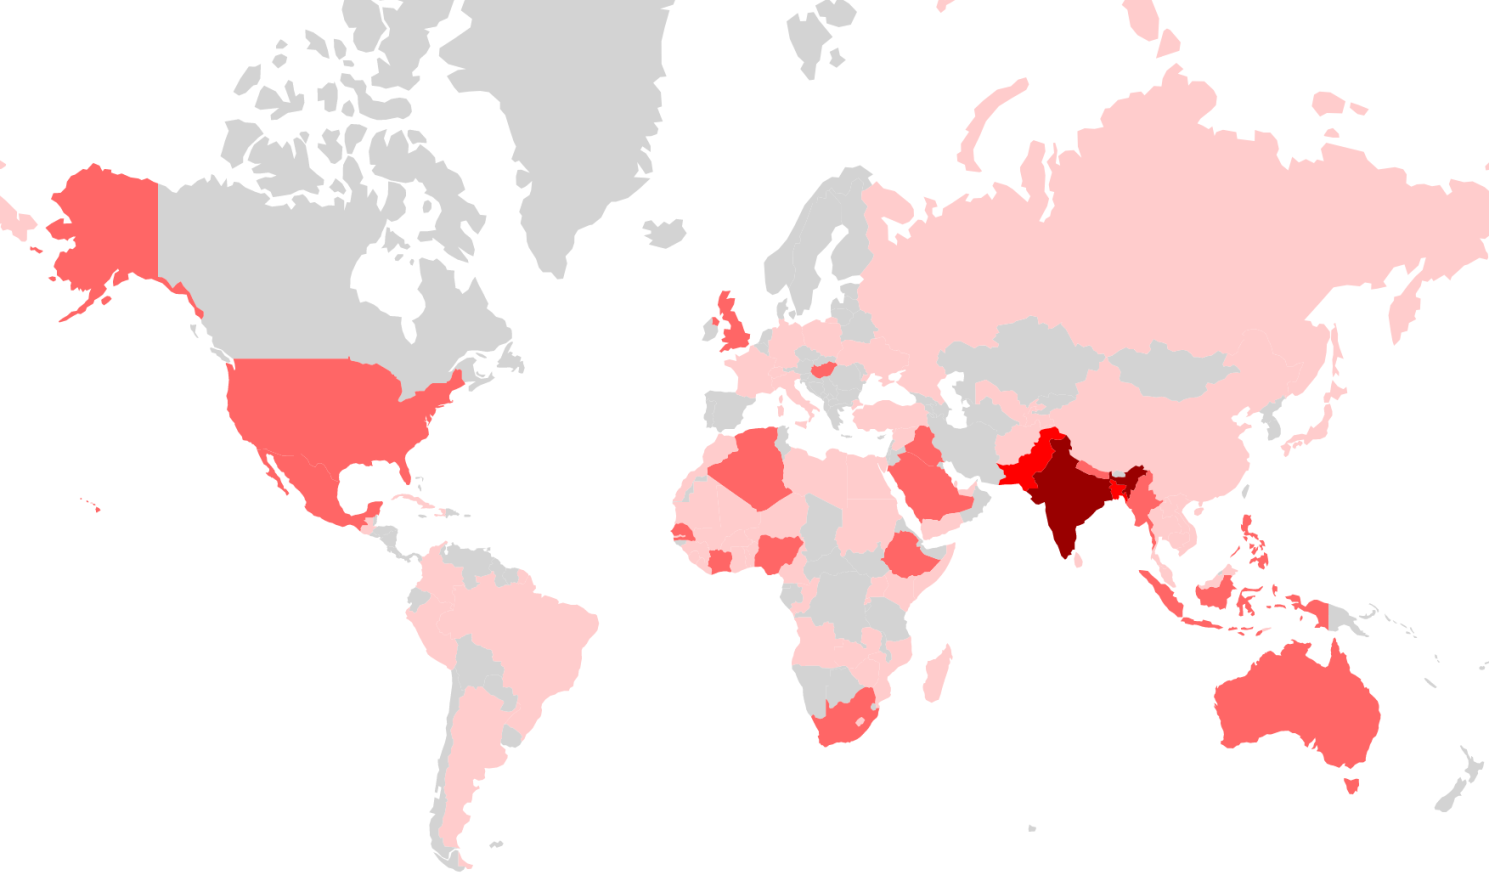 A world infection heat map shows the spread of the 25 million affected devices